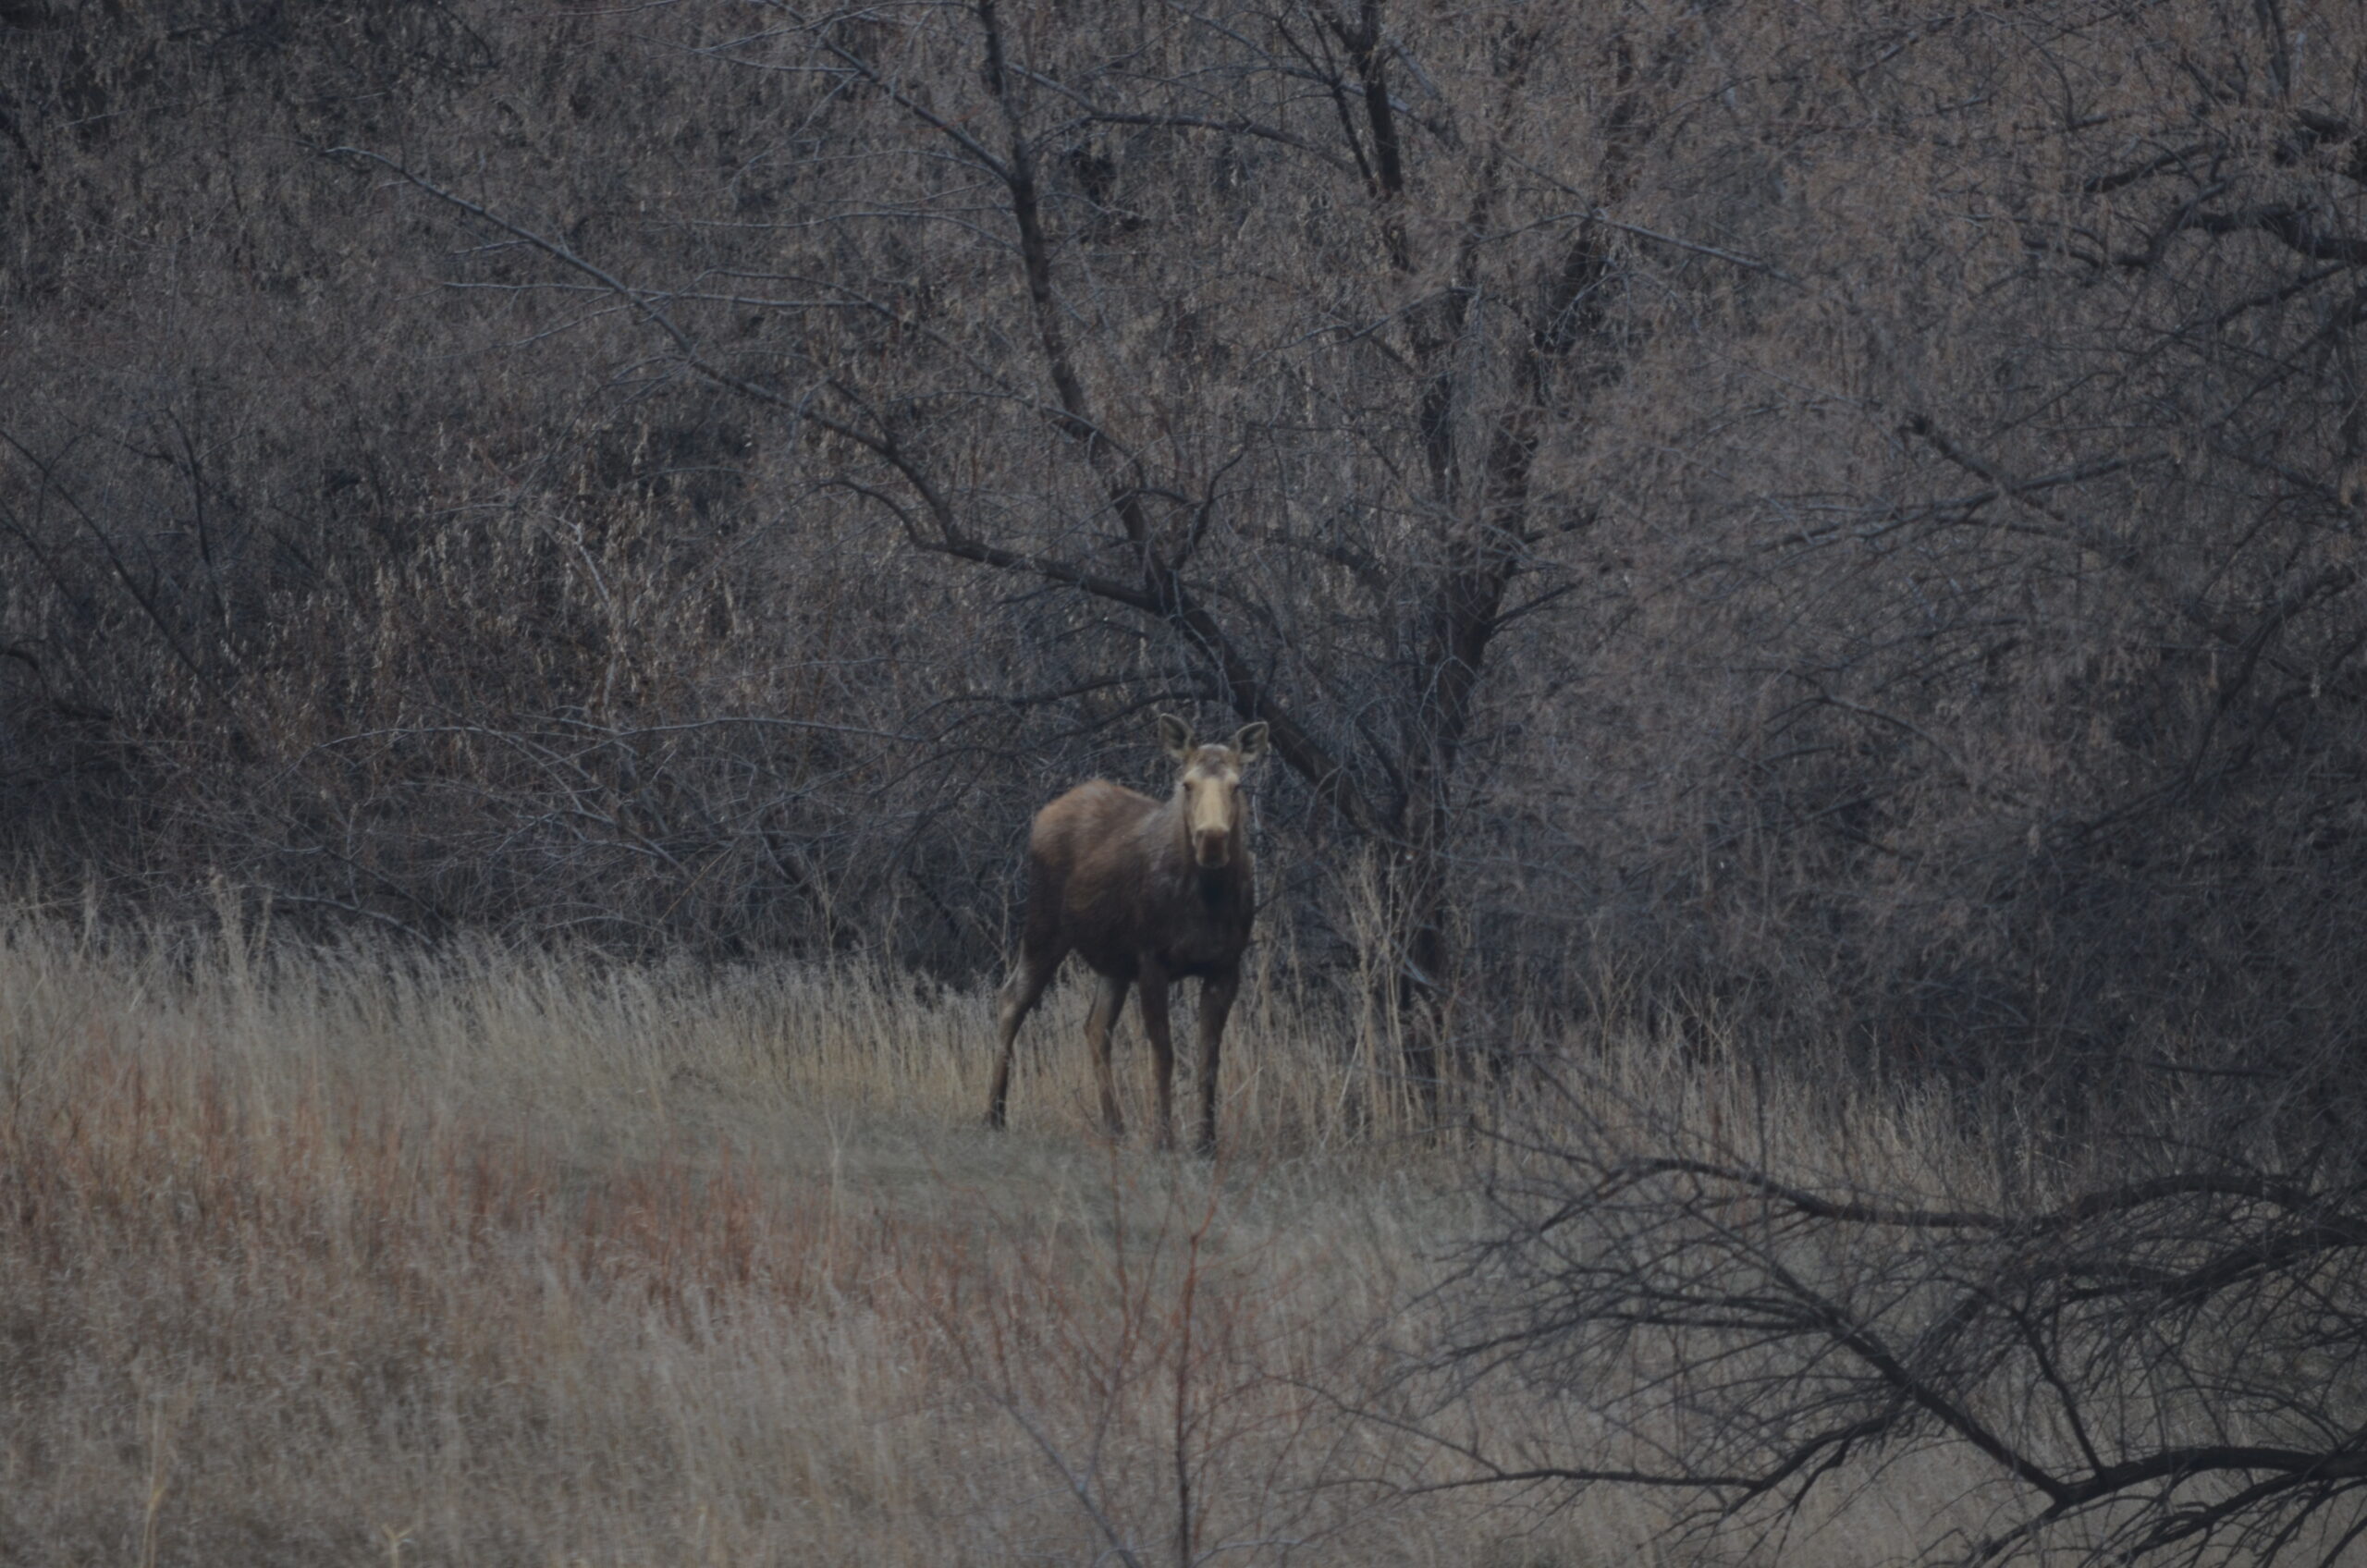 an antlerless moose stands alert with stiff legs, looking straight toward the photographer (from a safe distance!). Last years' grasses and leafless russian olive trees in the background give the photo a very fall or winter-like look despite the fact that it was taken in spring